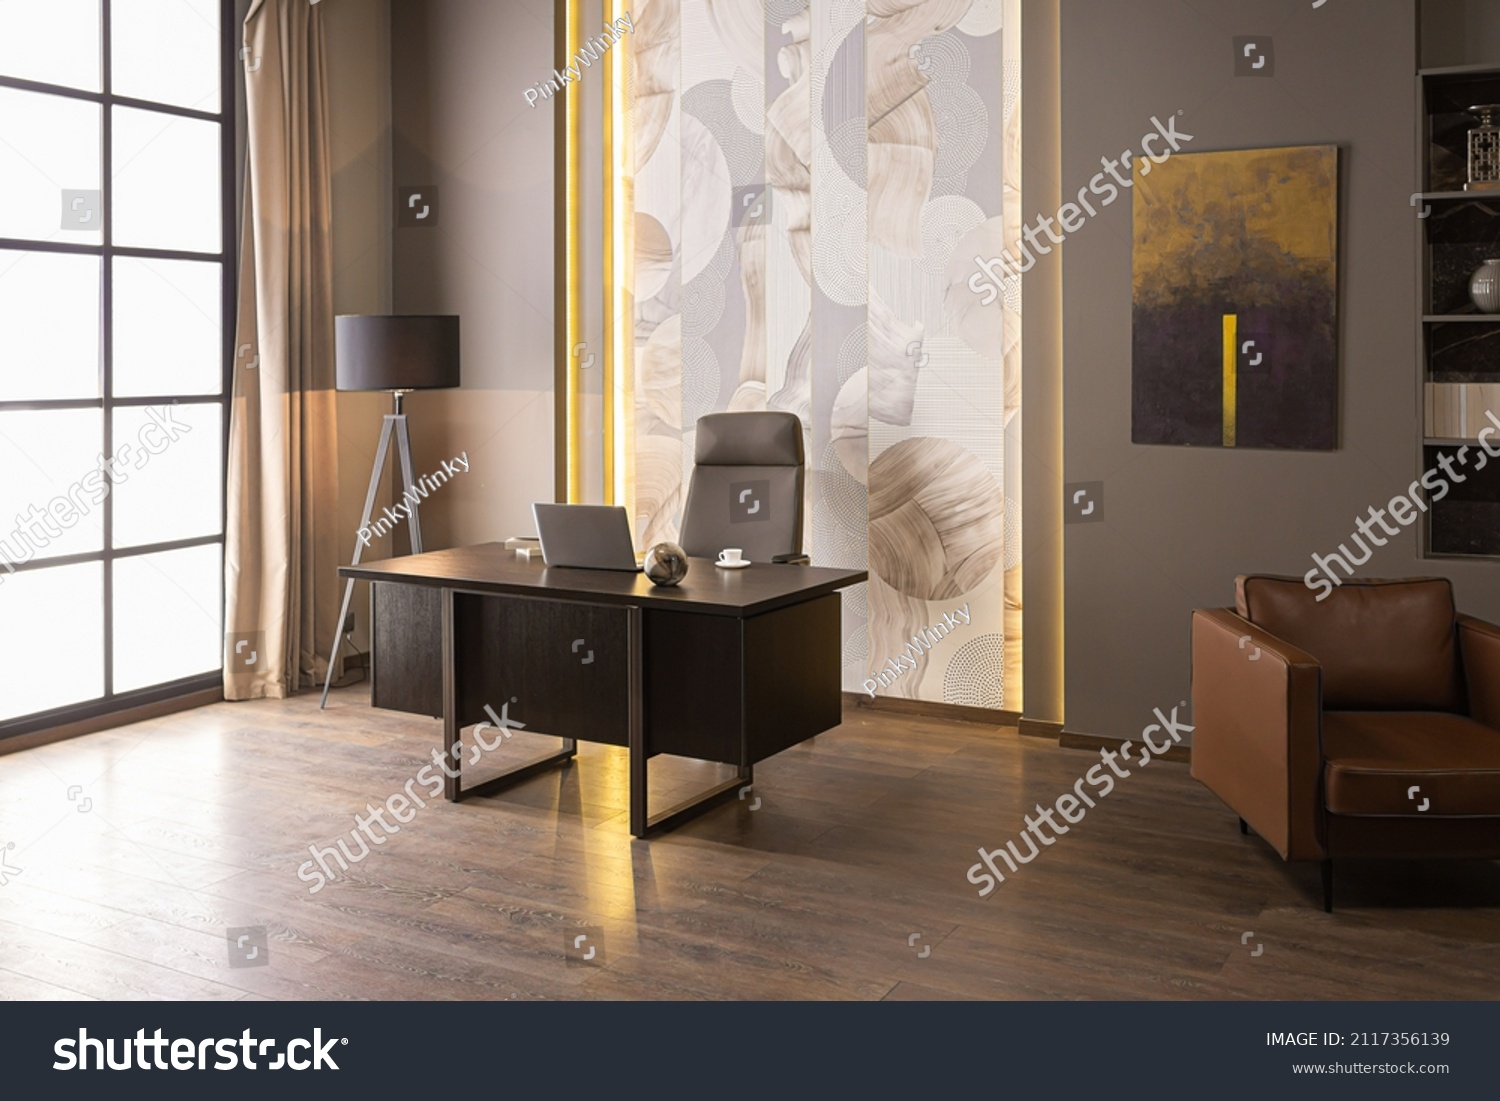 stylish luxury home office interior in an ultramodern brutal apartment in dark colors and cool led lighting #2117356139